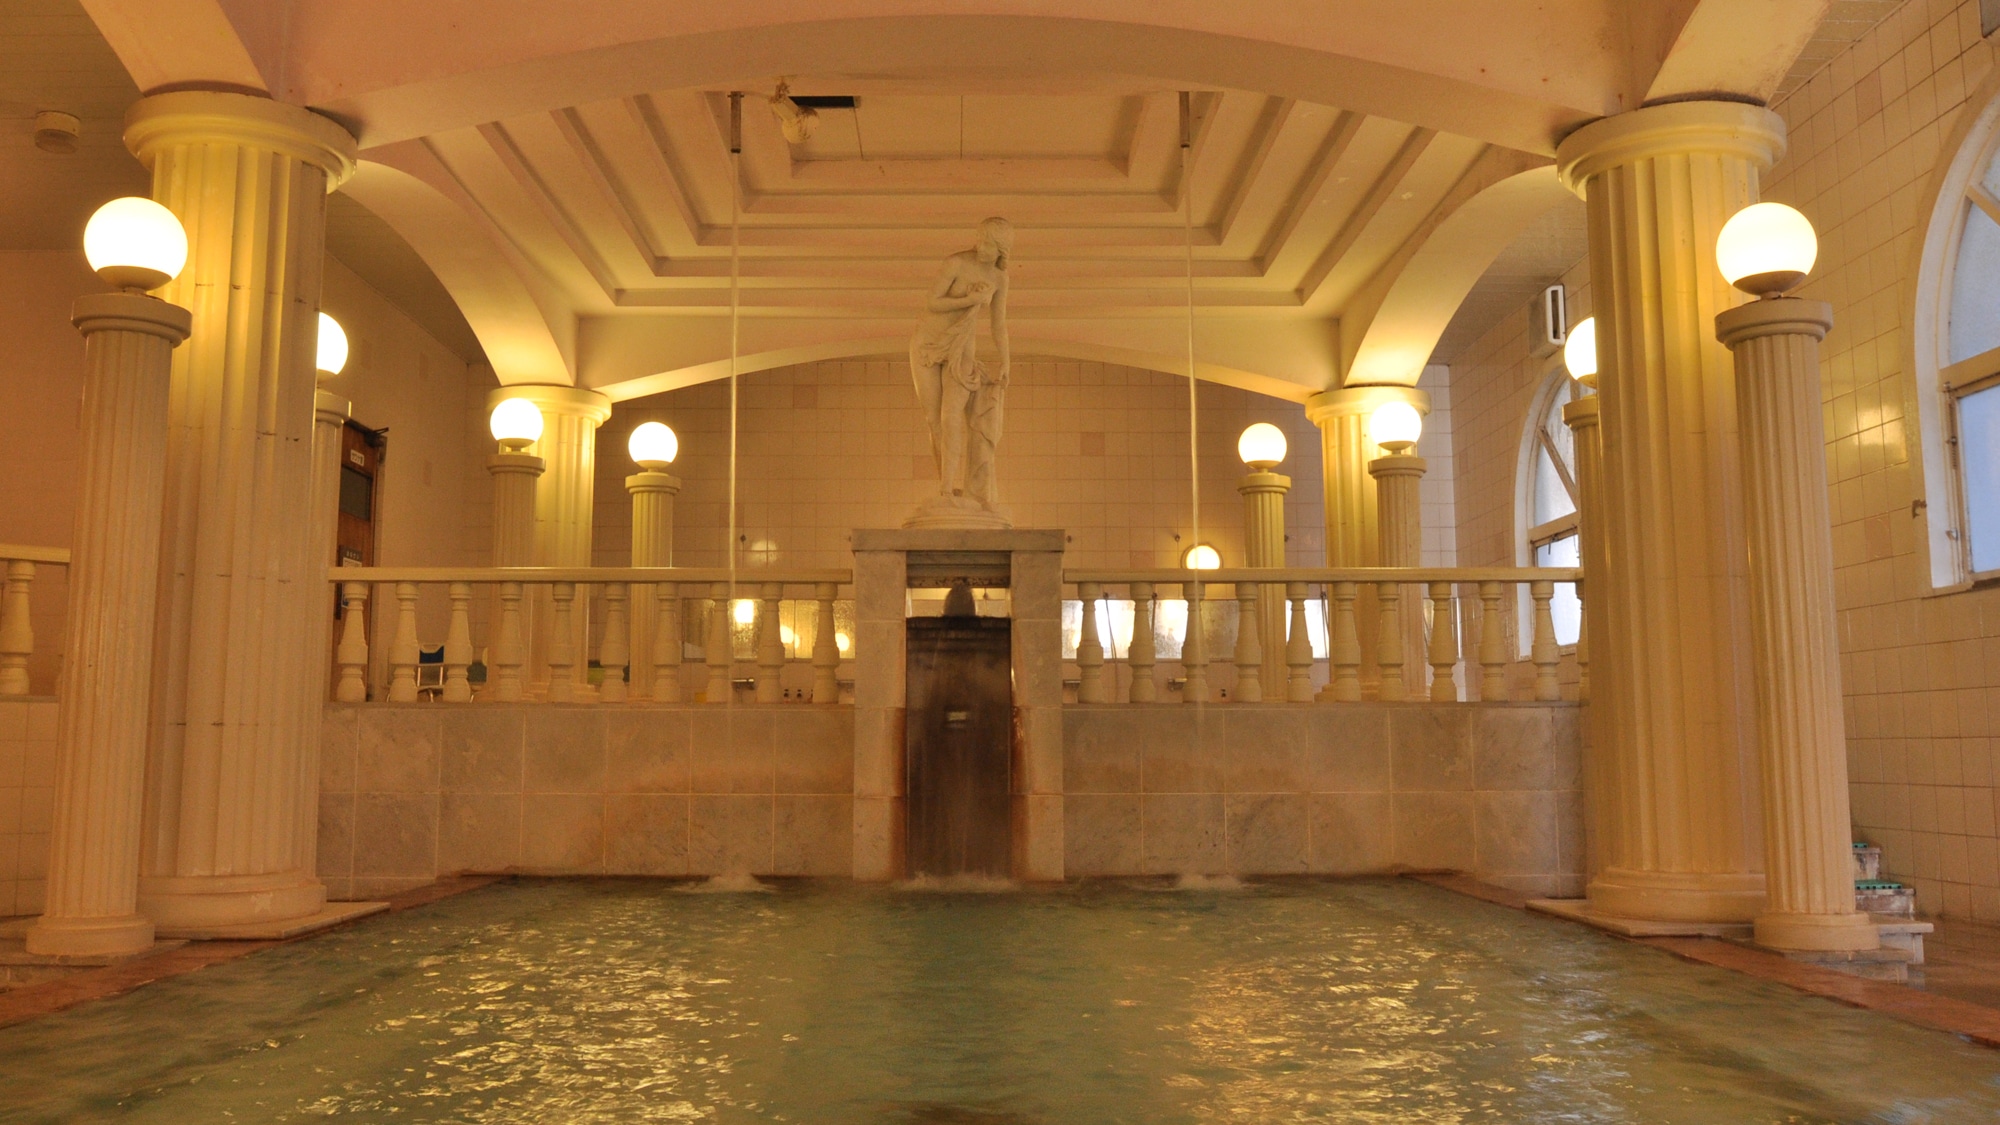 [Western bath] "Parthenon hot water" with the image of ancient Greece Loose ceiling